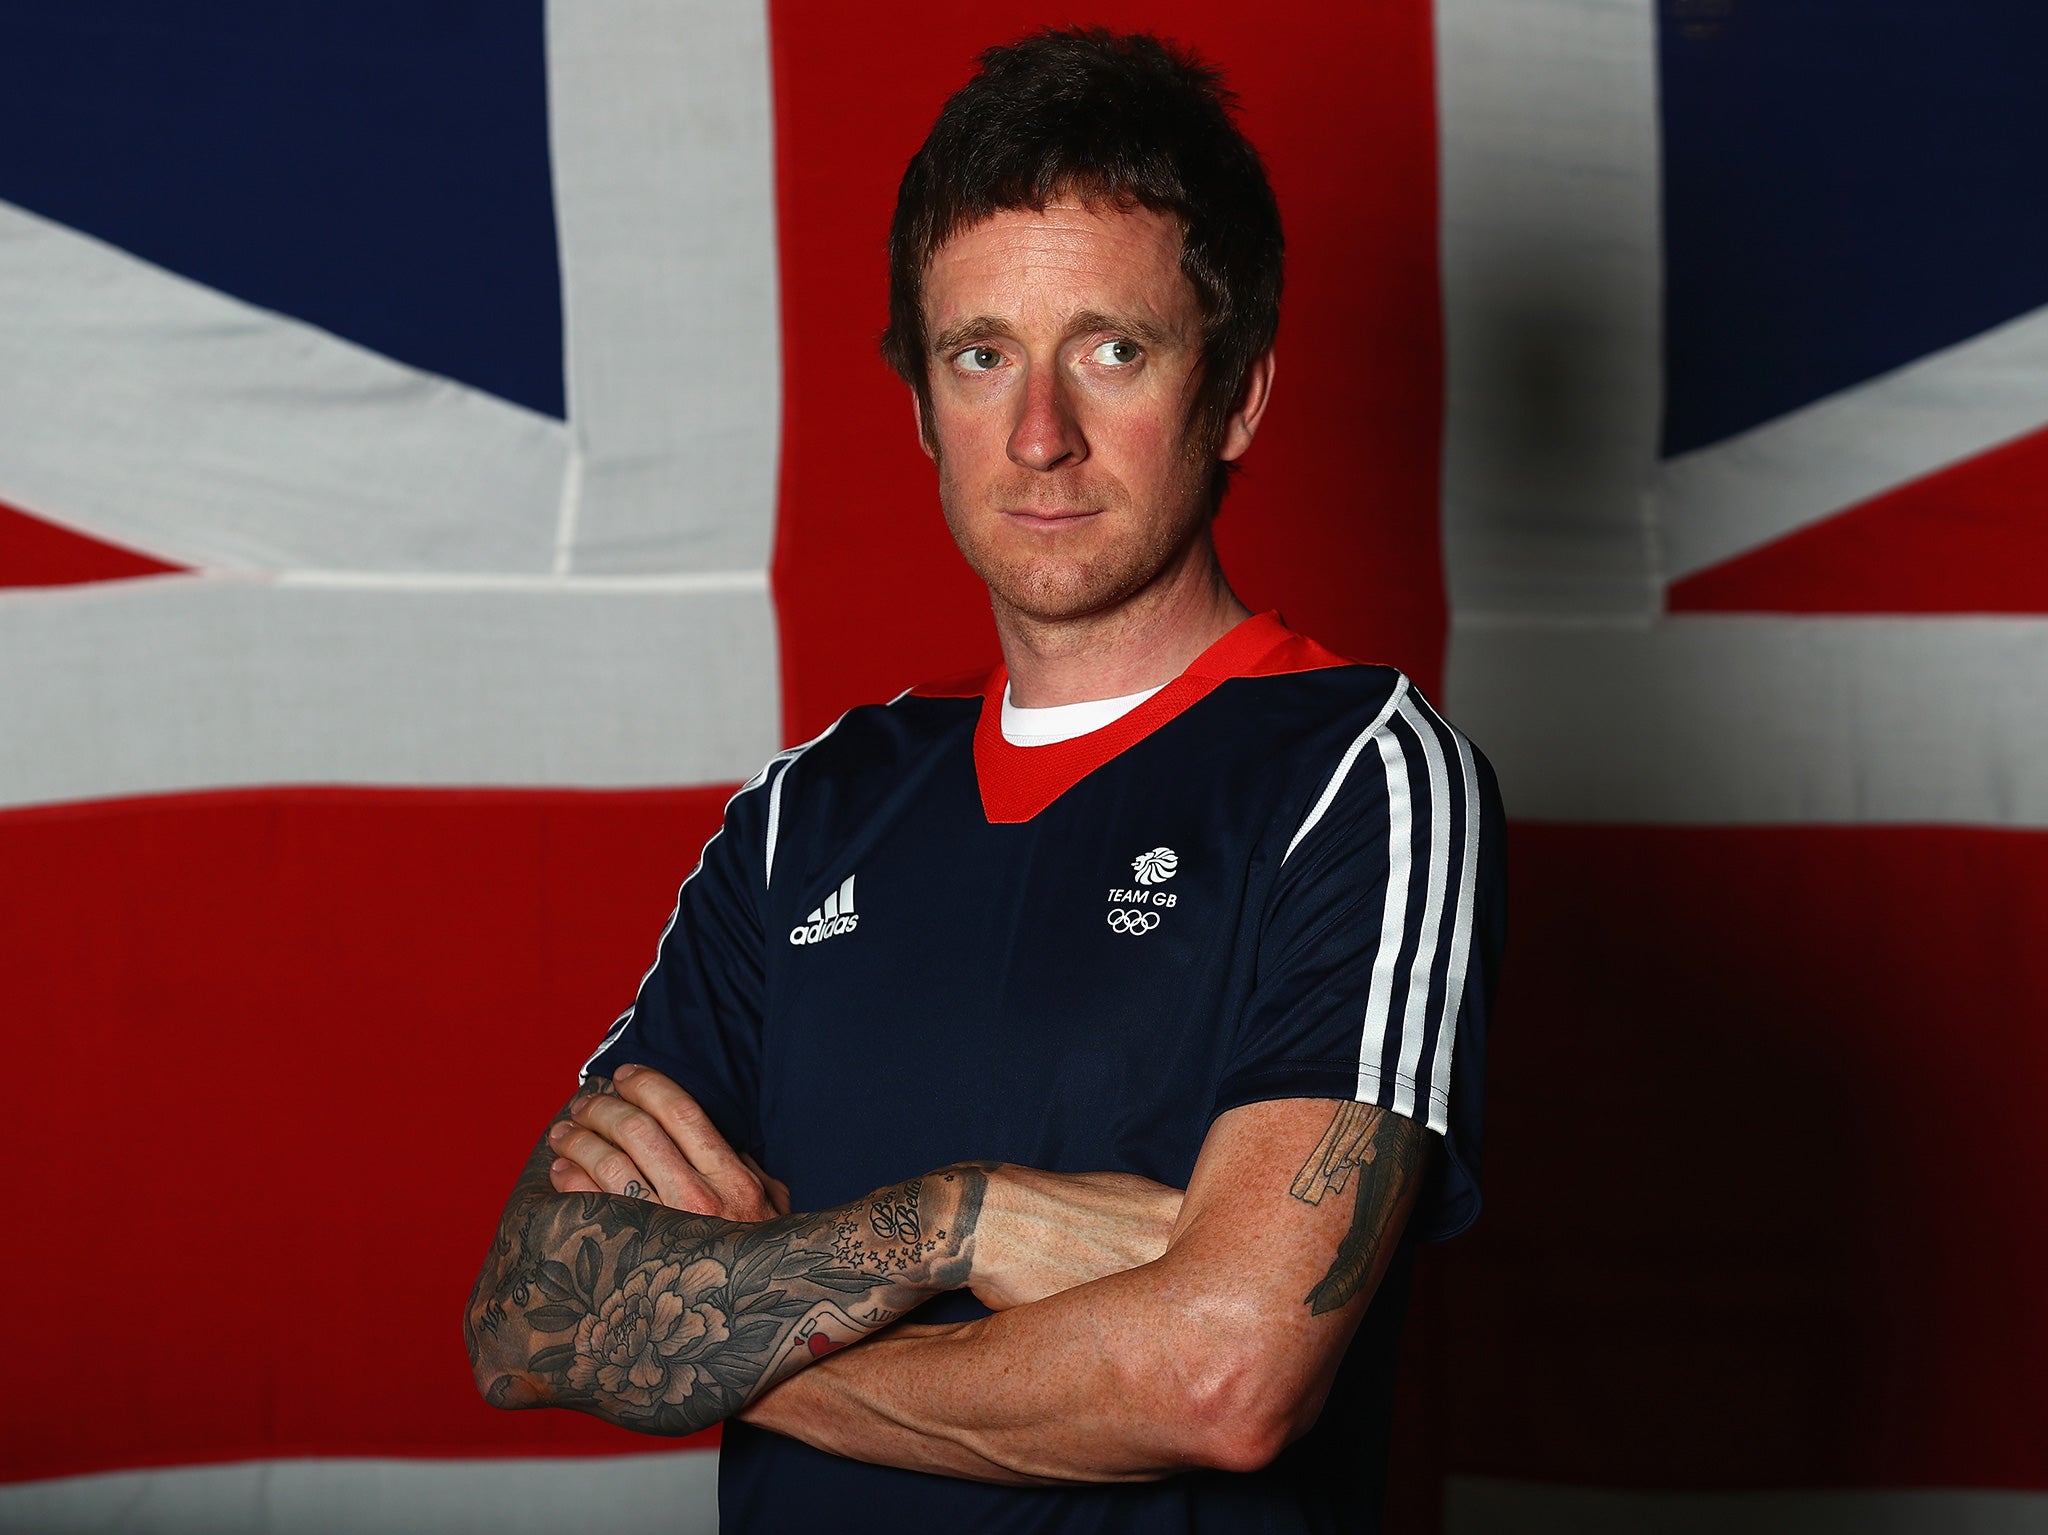 Wiggins is Britain's most decorated Olympian with seven medals